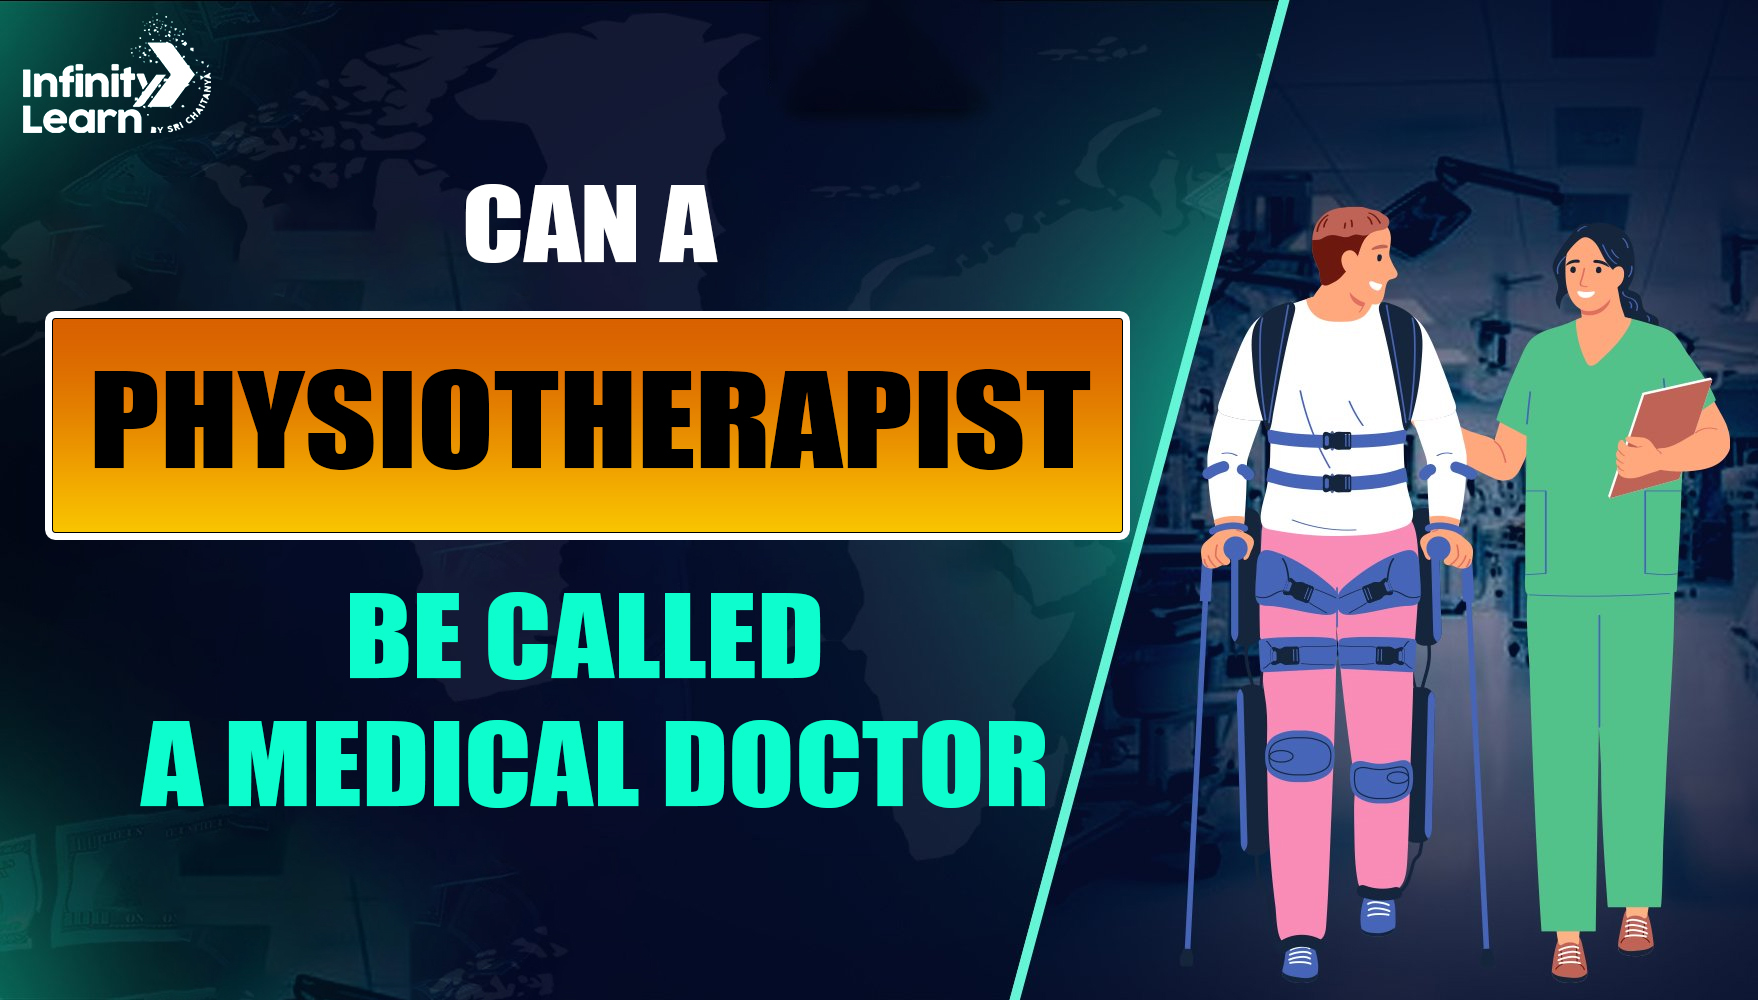 Can a Physiotherapist be called a Medical Doctor?